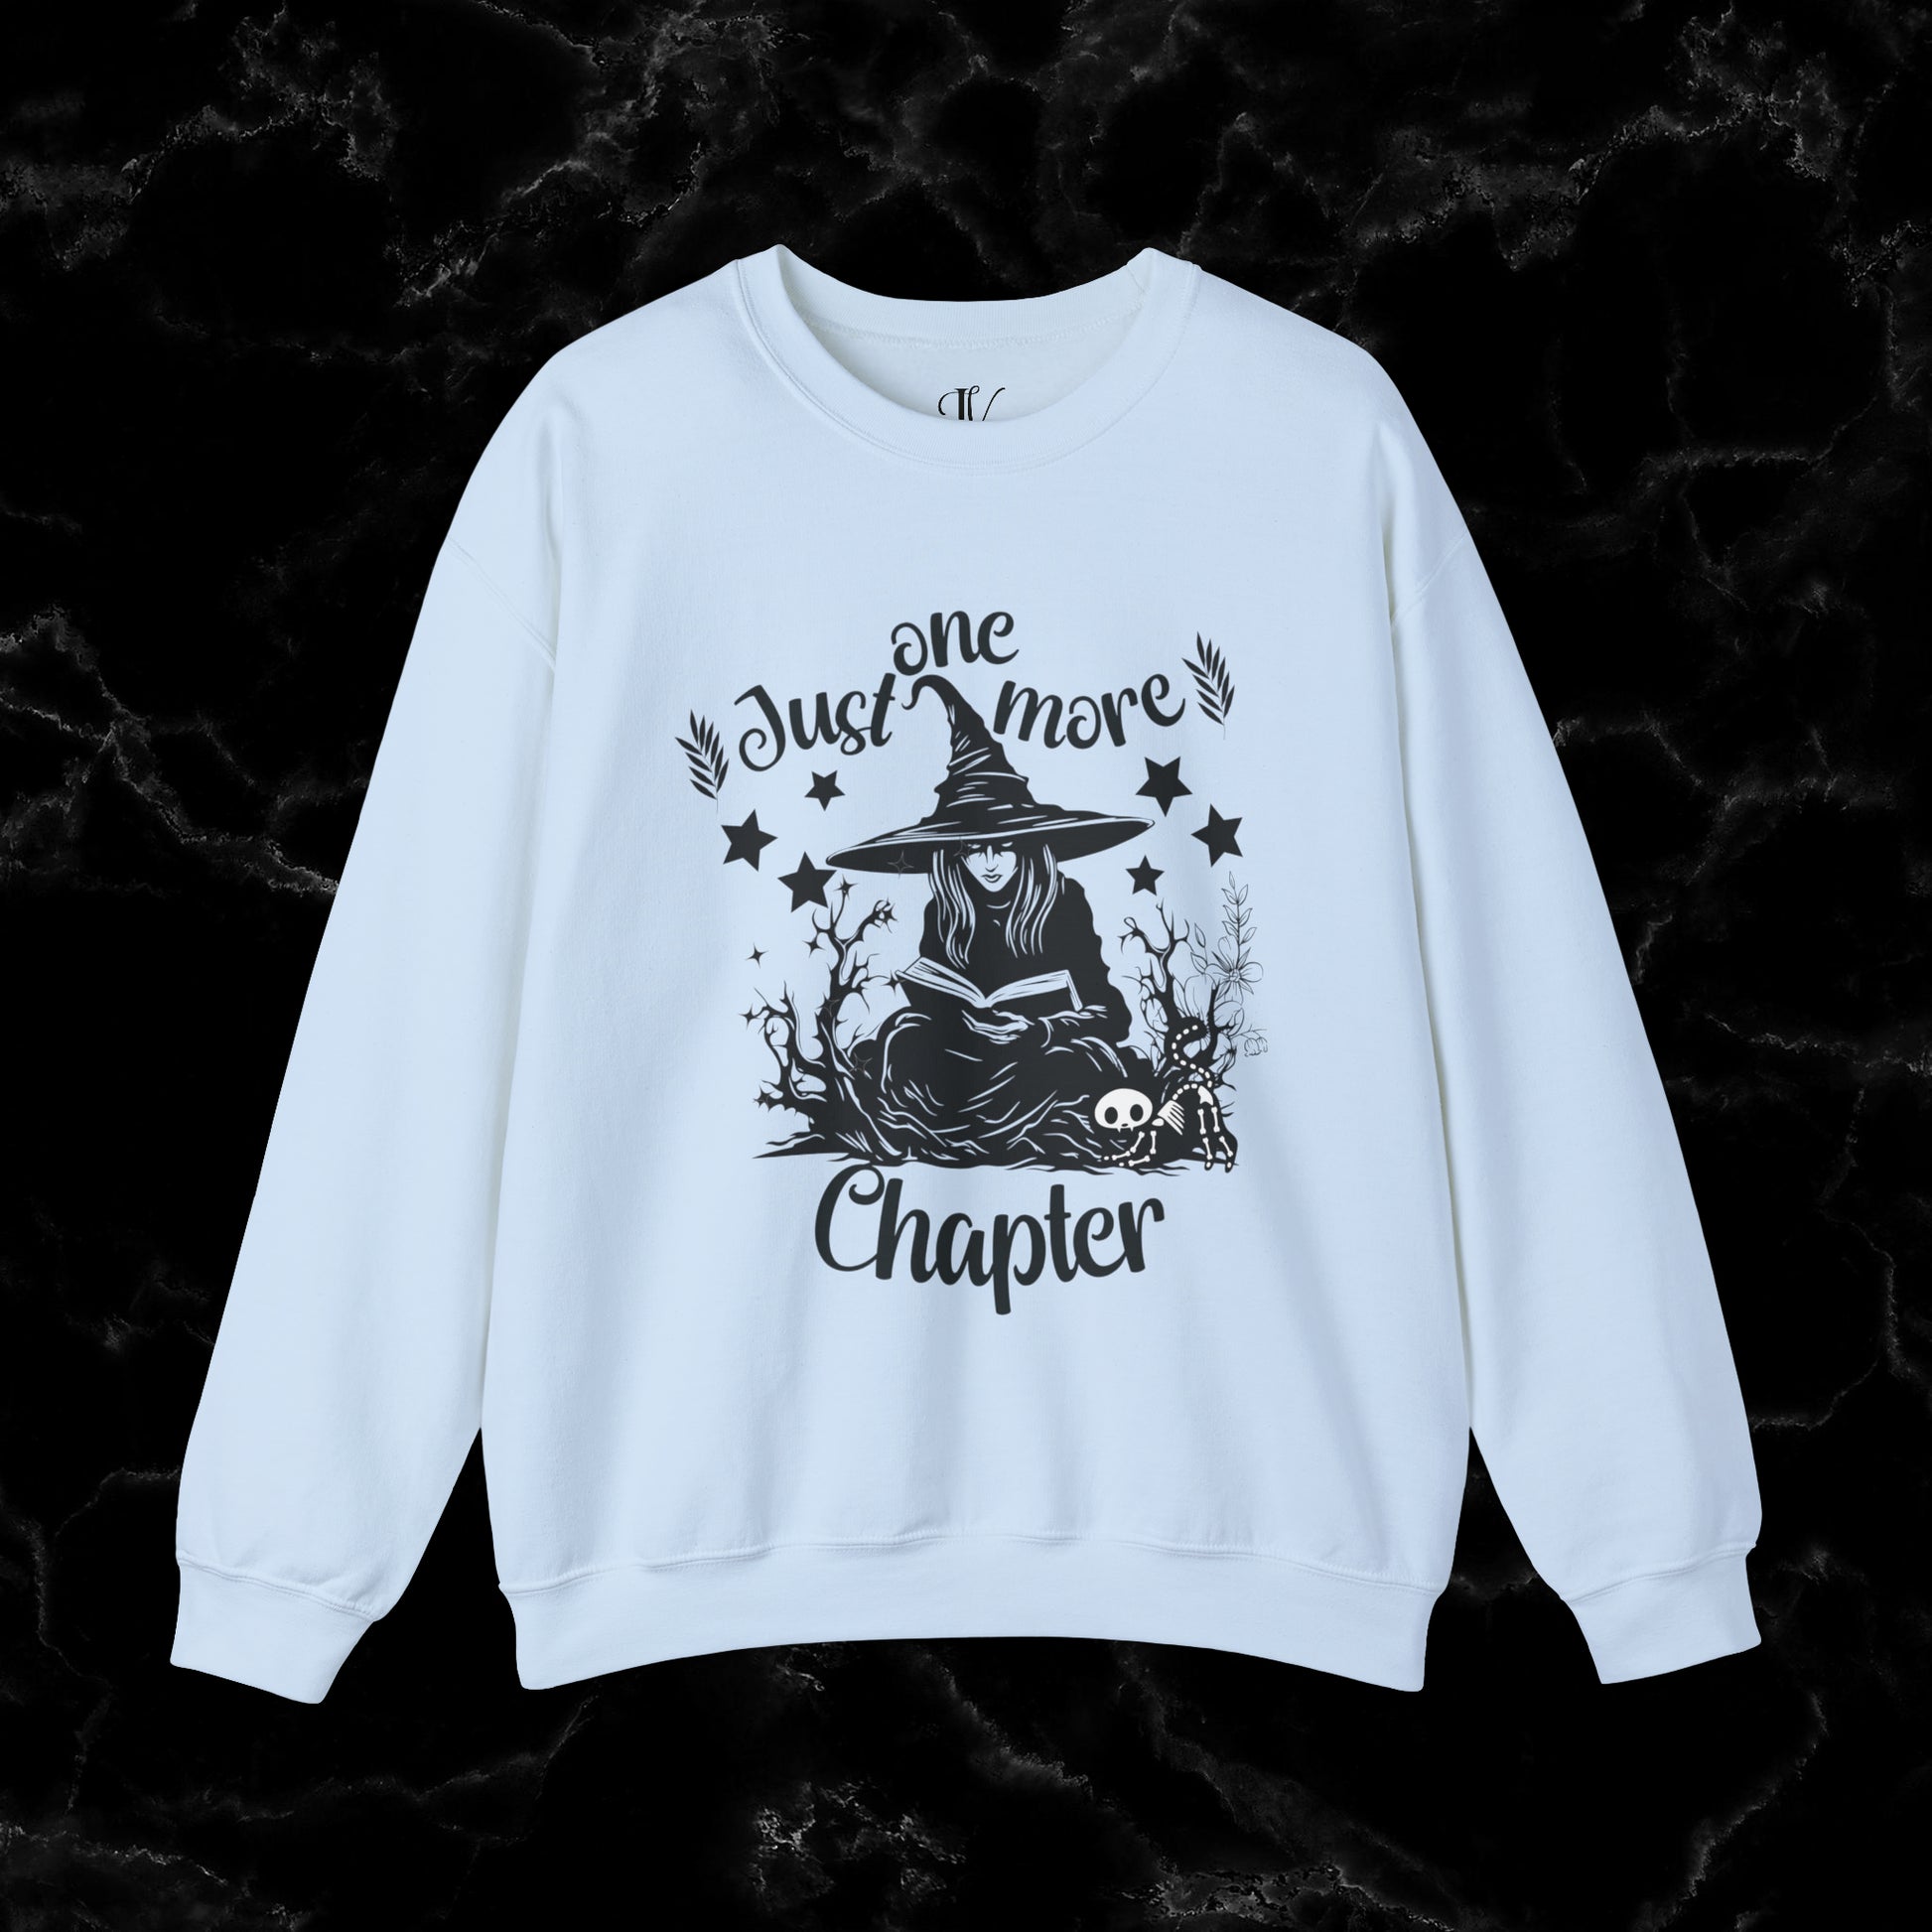 One More Chapter Sweatshirt - Book Lover Gift, Librarian Shirt, Reading Witch - Cozy Sweatshirt for Book Lovers Halloween Sweatshirt S Light Blue 